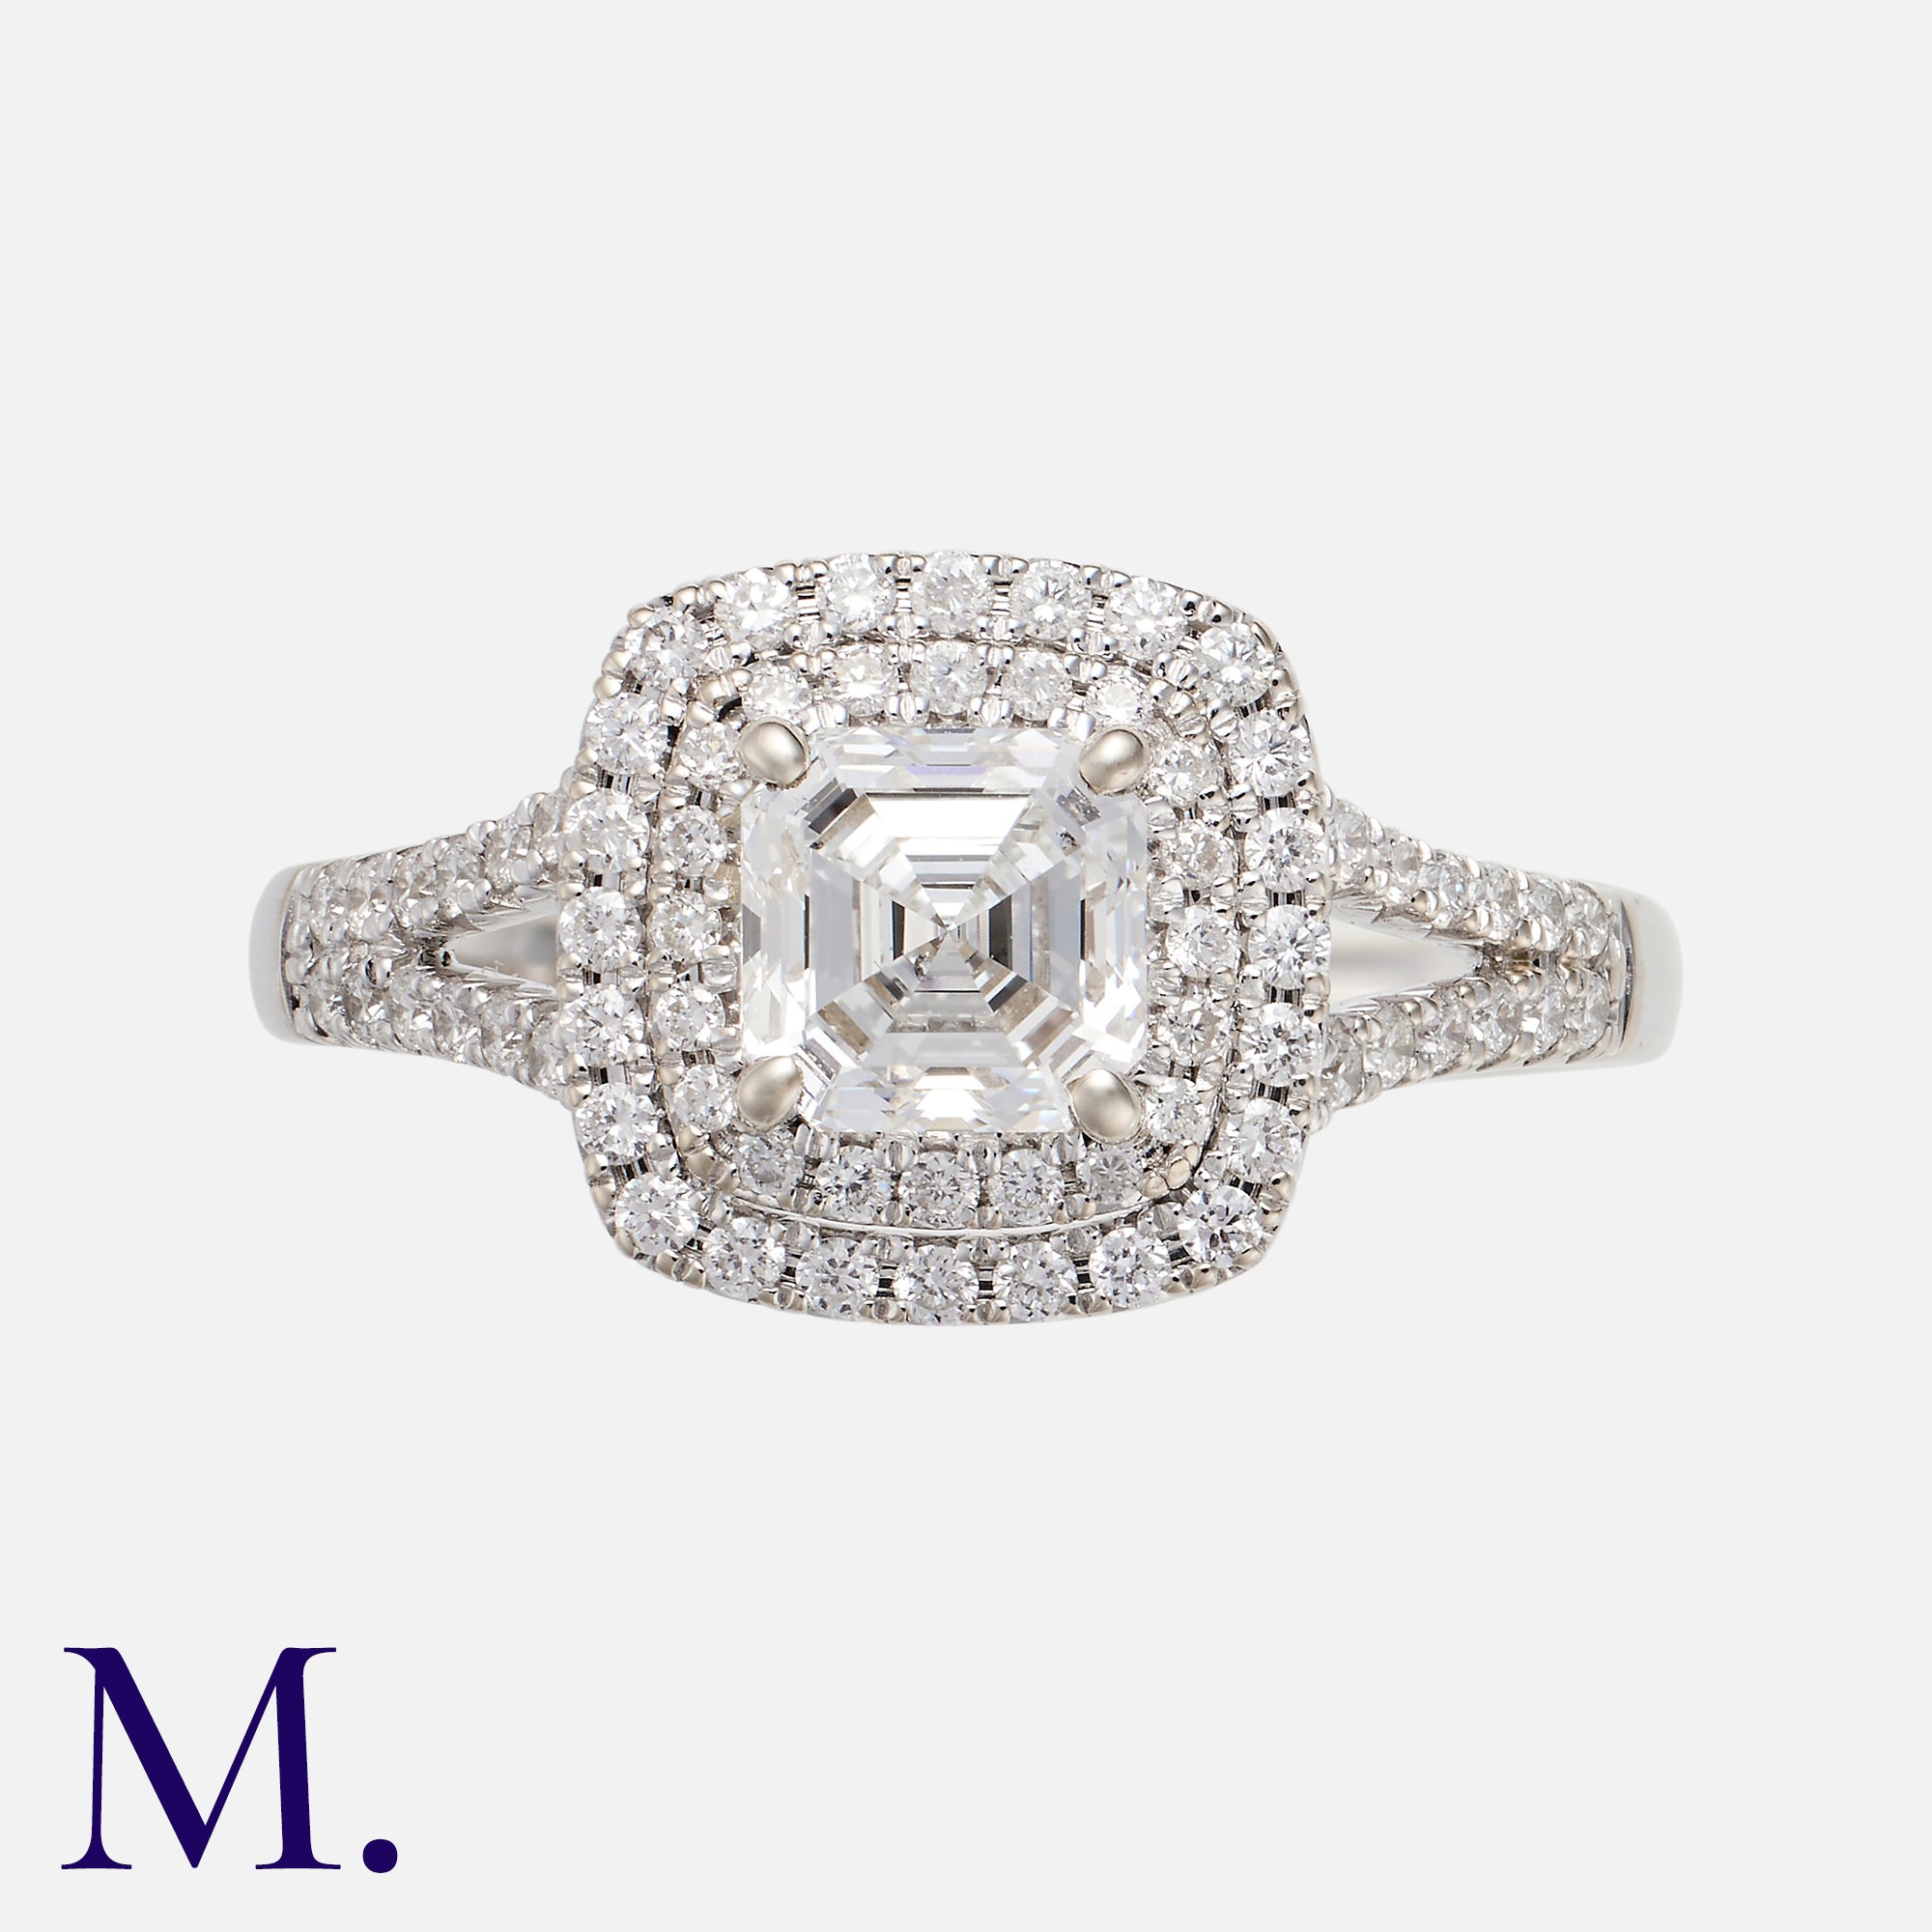 A Diamond Ring in 18k white gold, set with a central Asscher cut diamond of 1.01cts set within a two